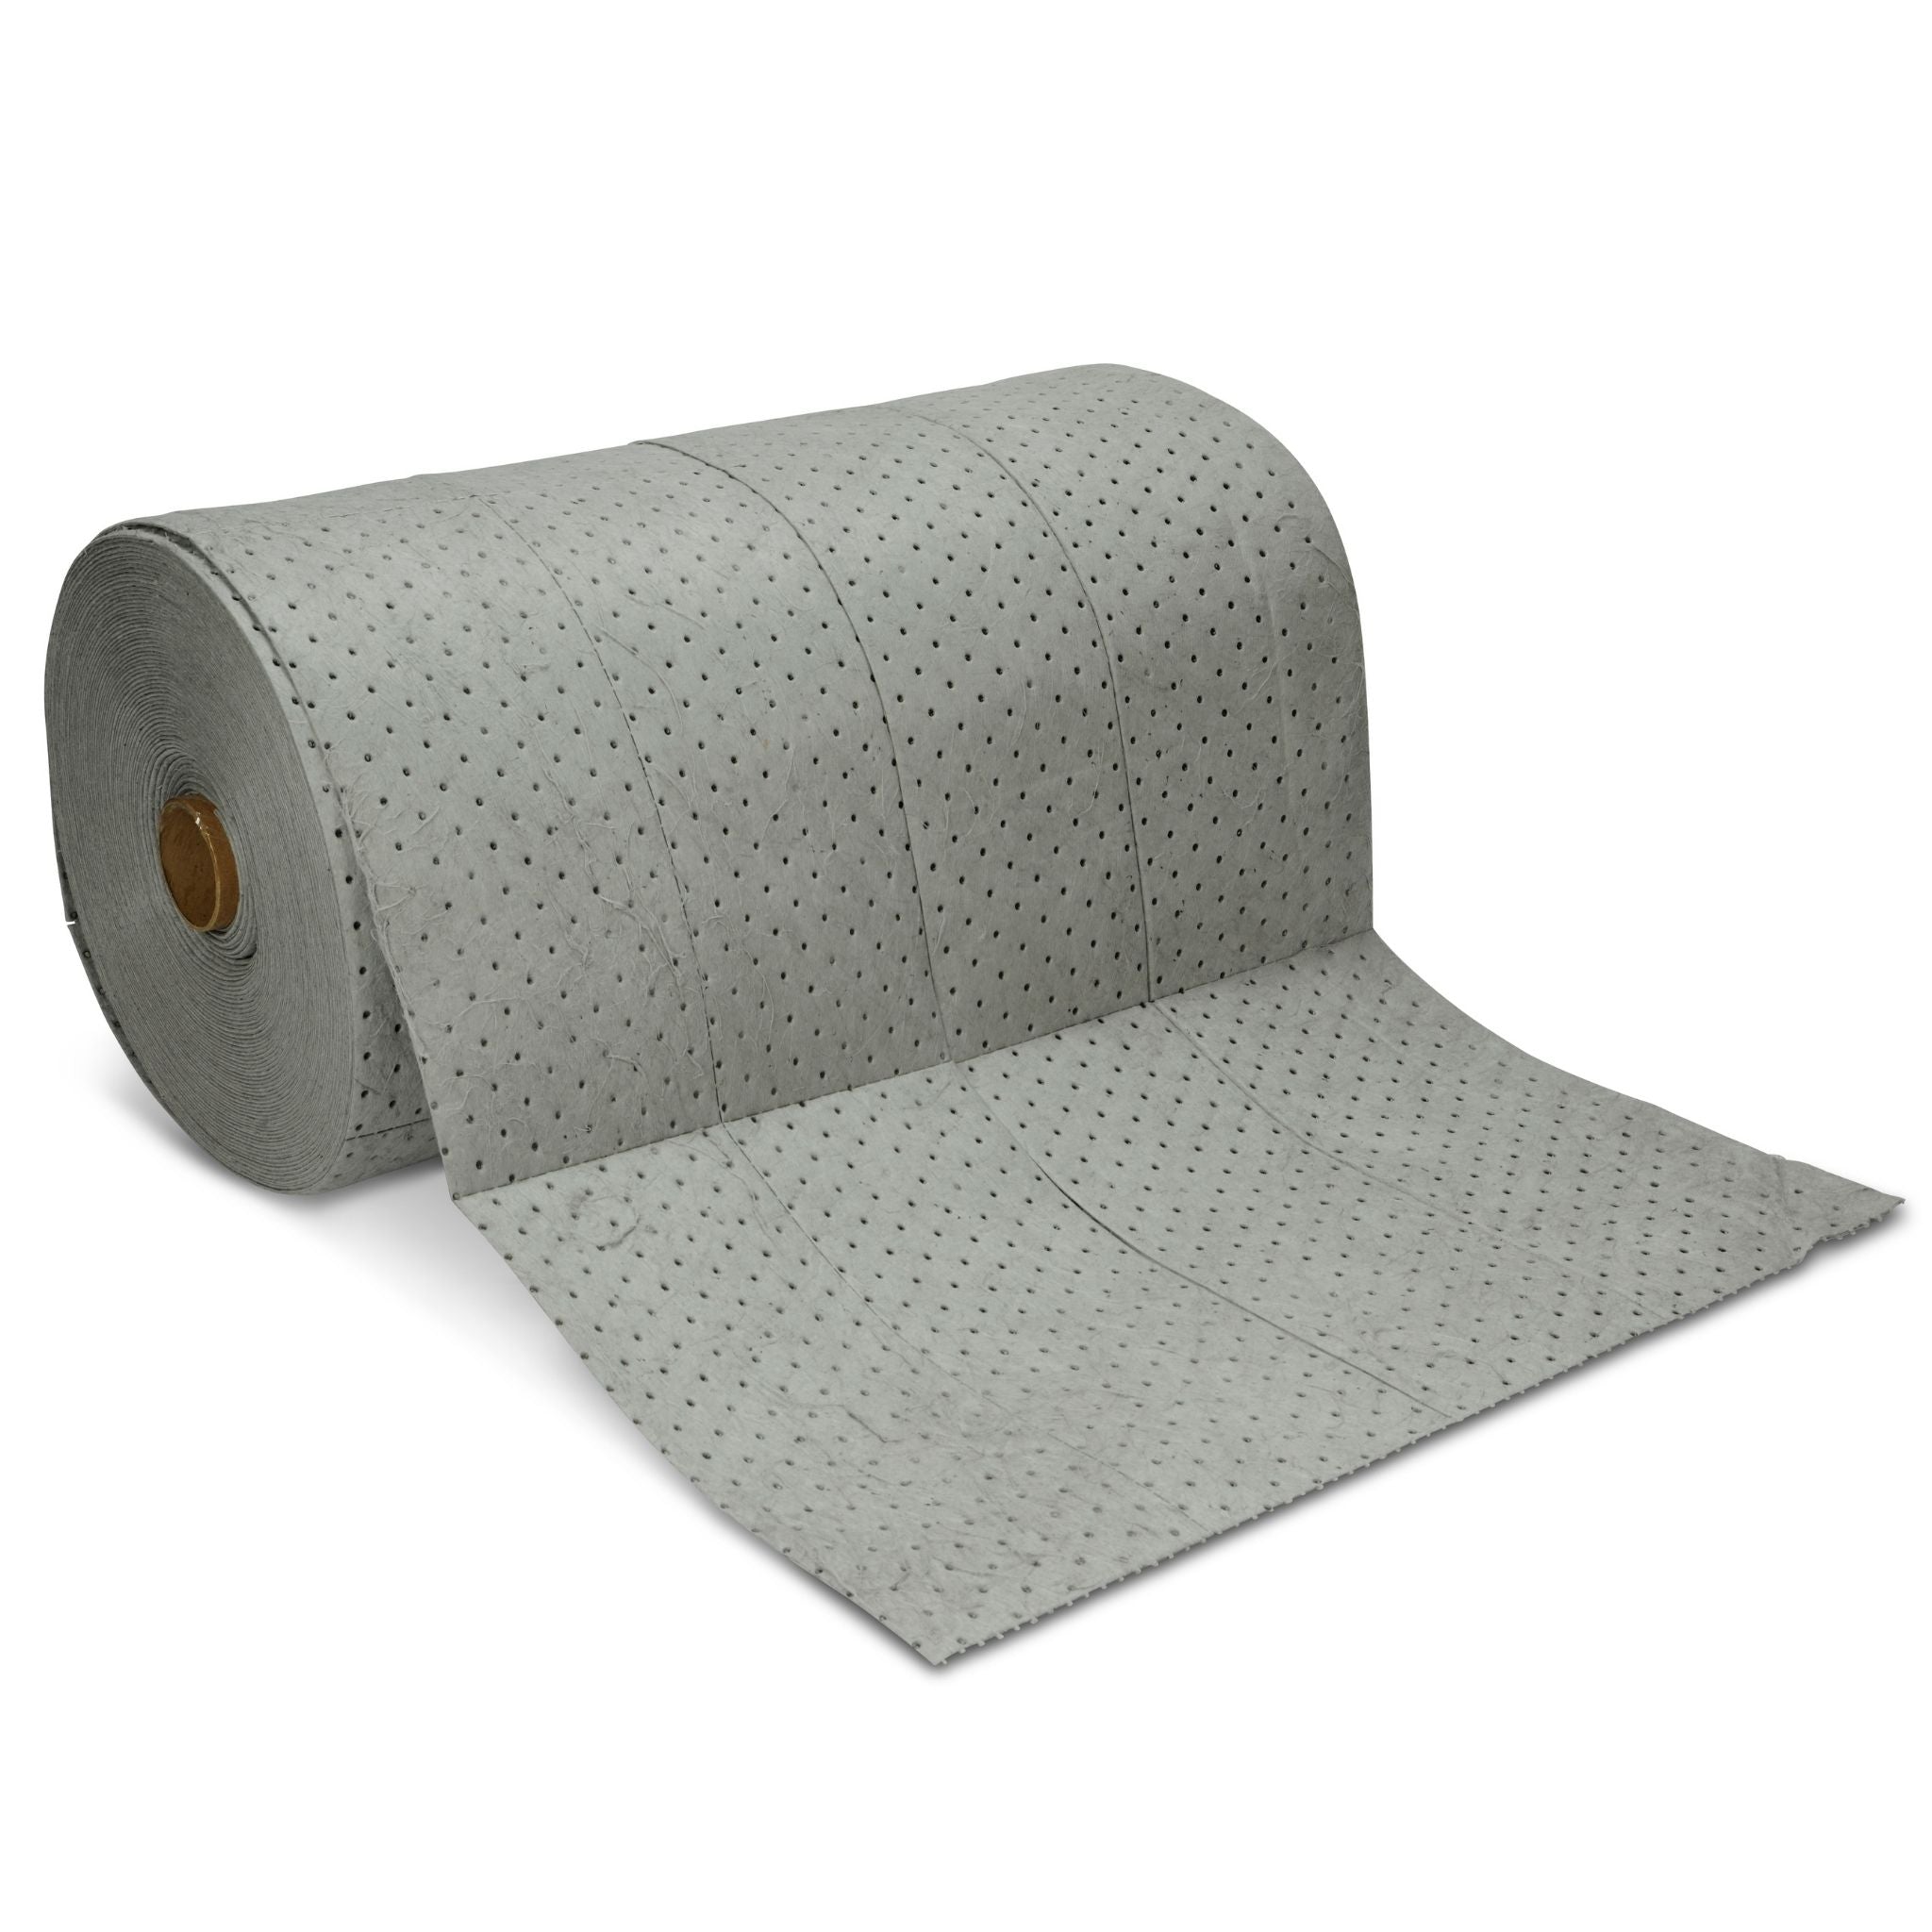 AABACO Universal Absorbent Roll - 30" X 150' - Heavy Weight